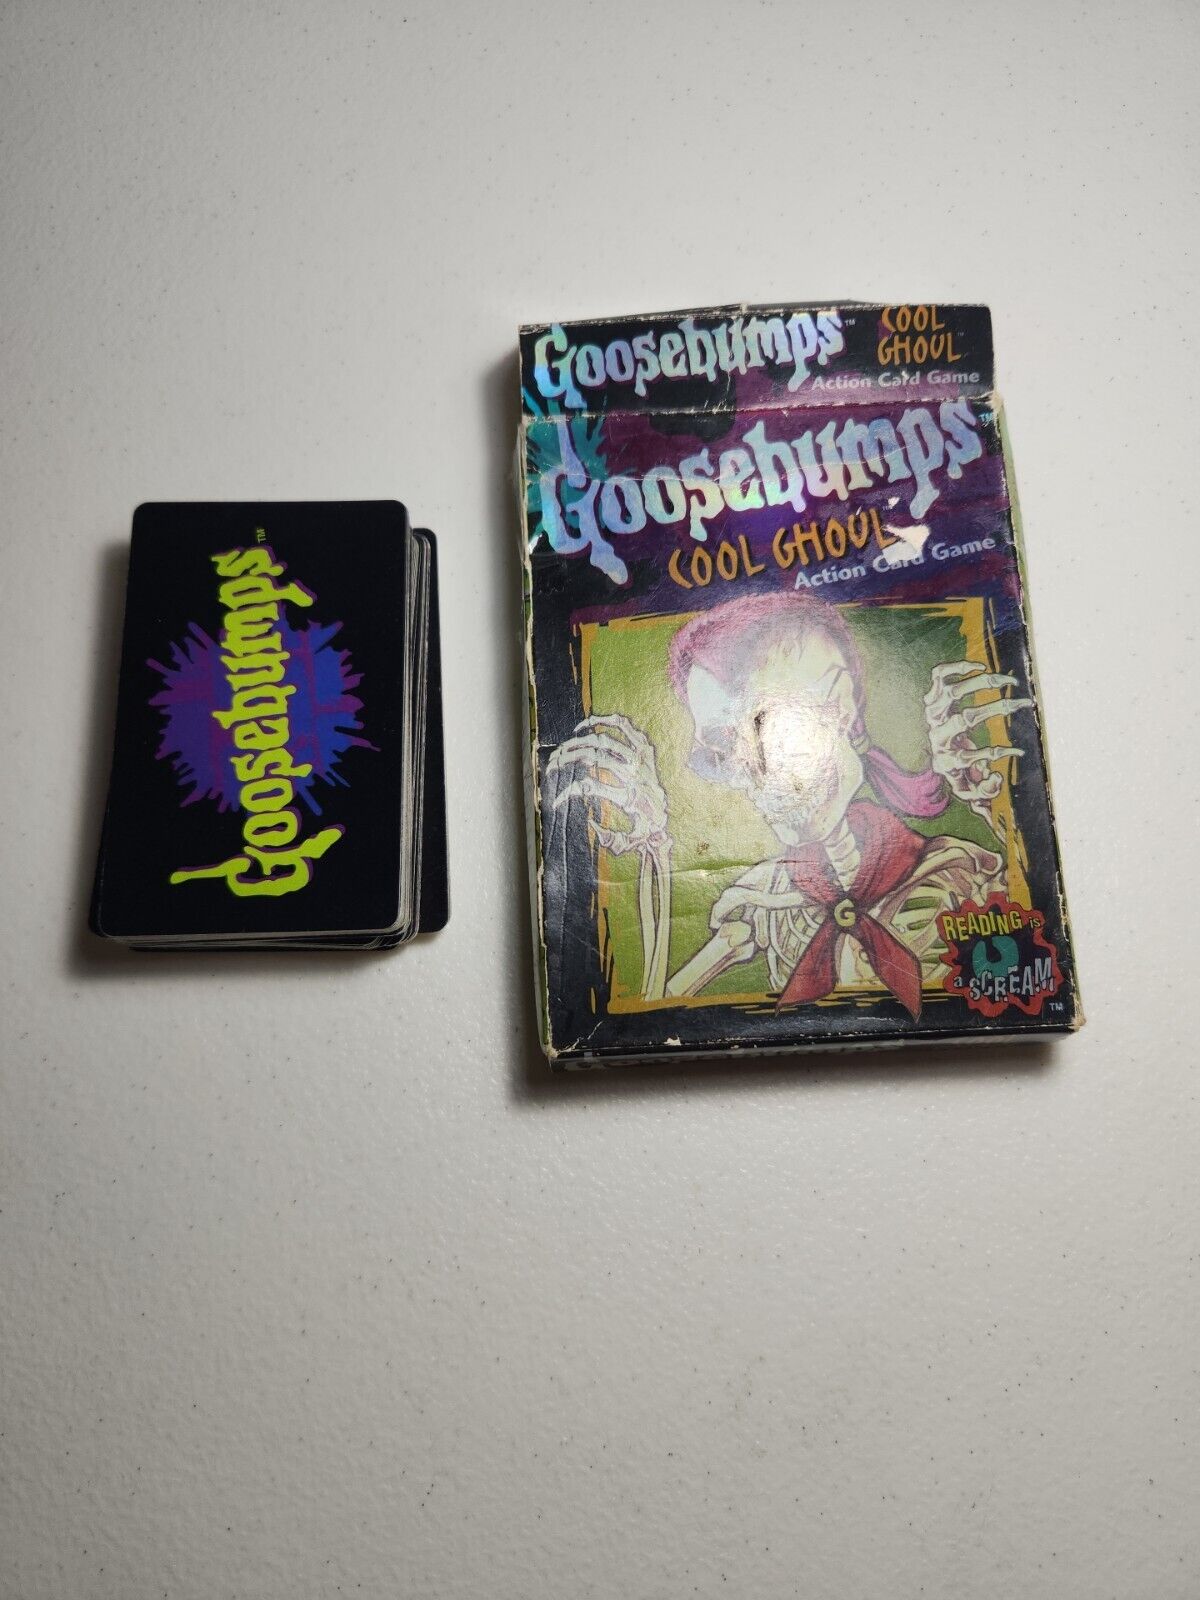 Goosebumps Cool Ghoul Action Card Game 1996 Parker Brothers 